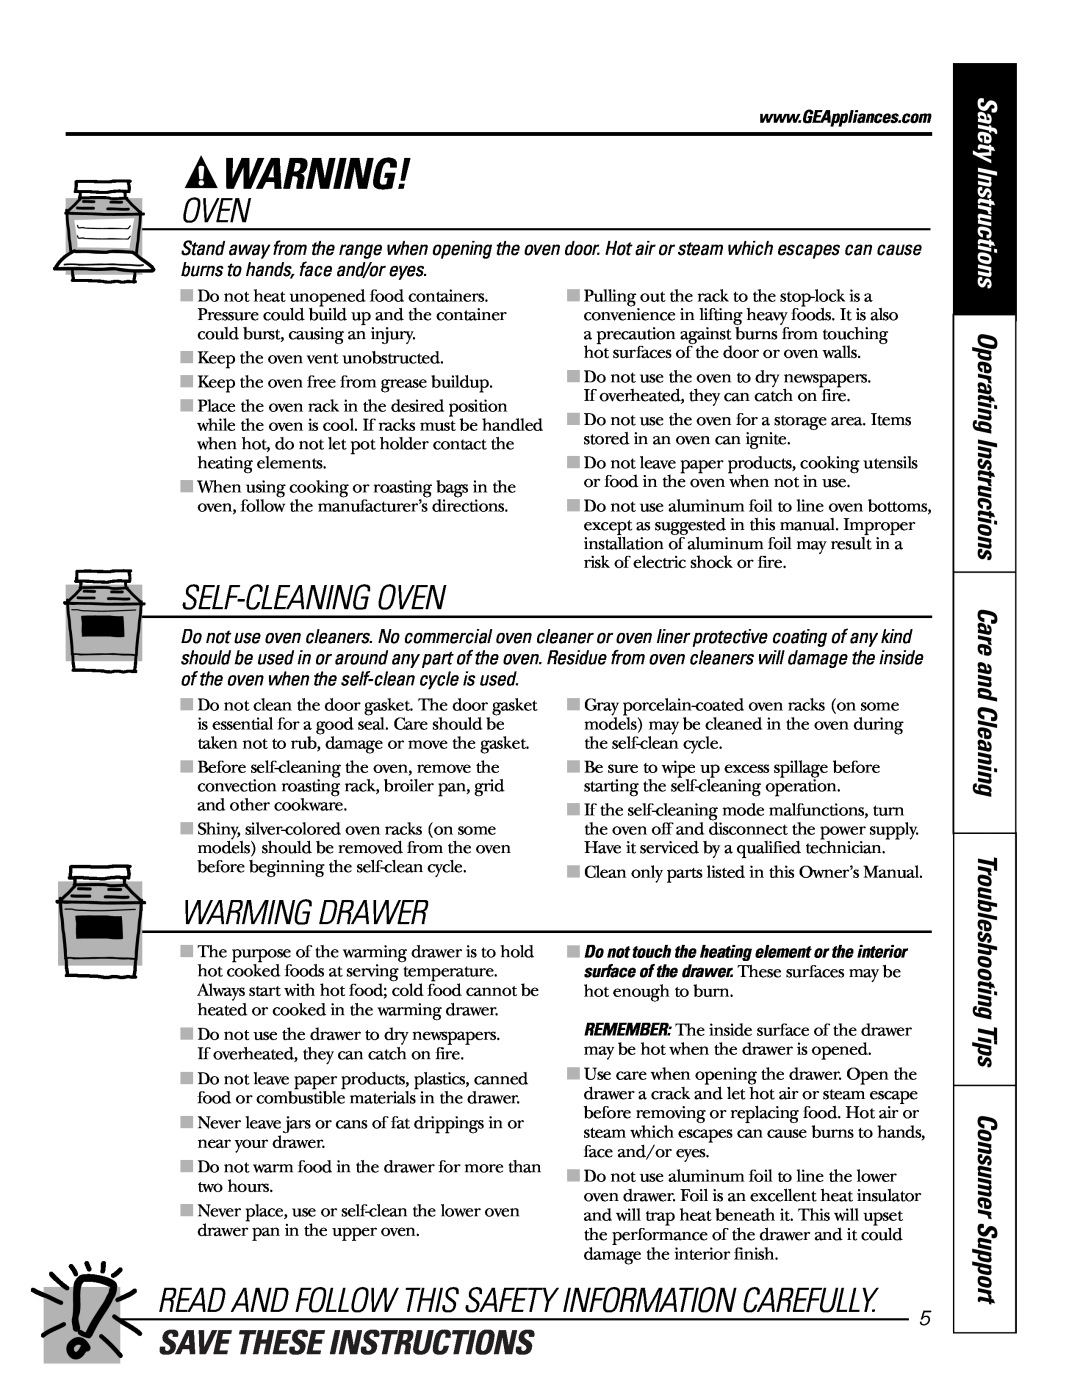 GE JB910 Oven, Self-Cleaningoven, Warming Drawer, Save These Instructions, Operating Instructions, Tips Consumer Support 